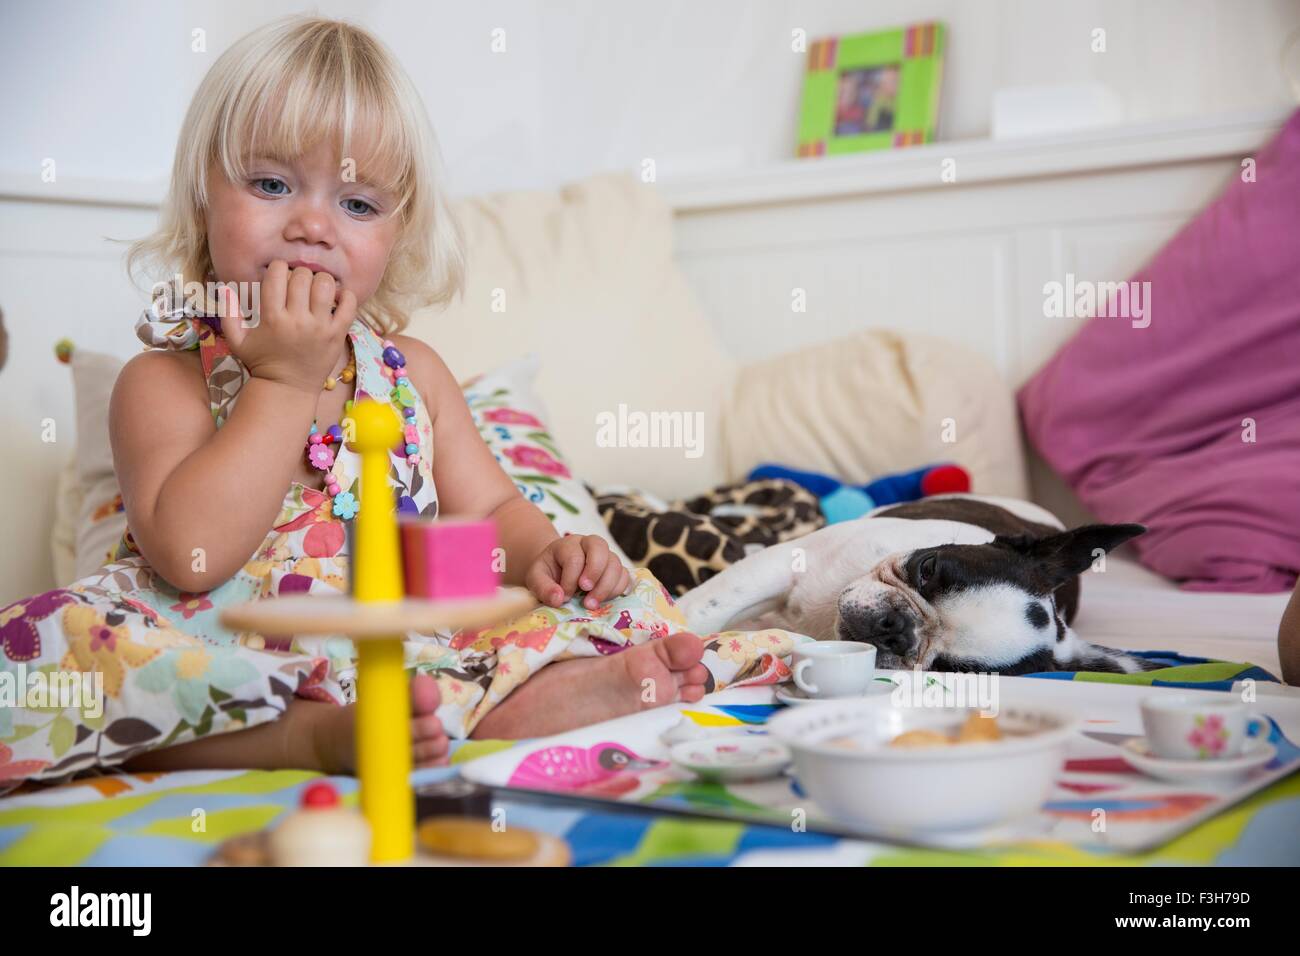 Female toddler Playing with toy tea set on bed Banque D'Images